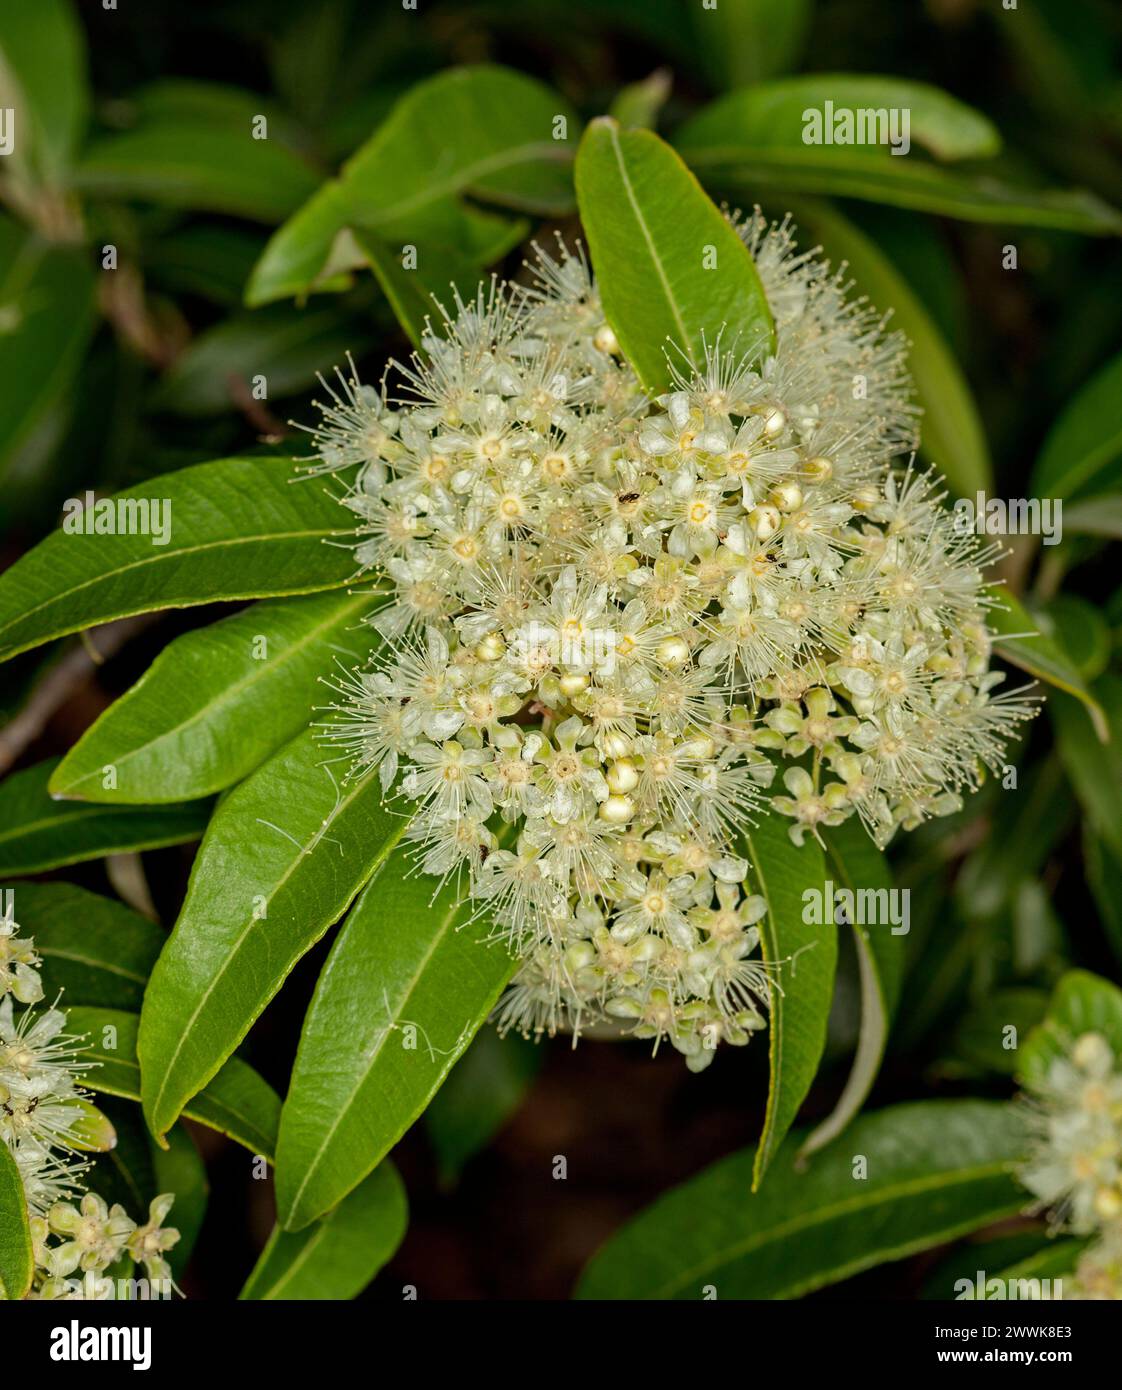 Clusters of fluffy cream coloured flowers and green leaves of Backhousia citriodora, Lemon Scented Myrtle, Australian native tree Stock Photo